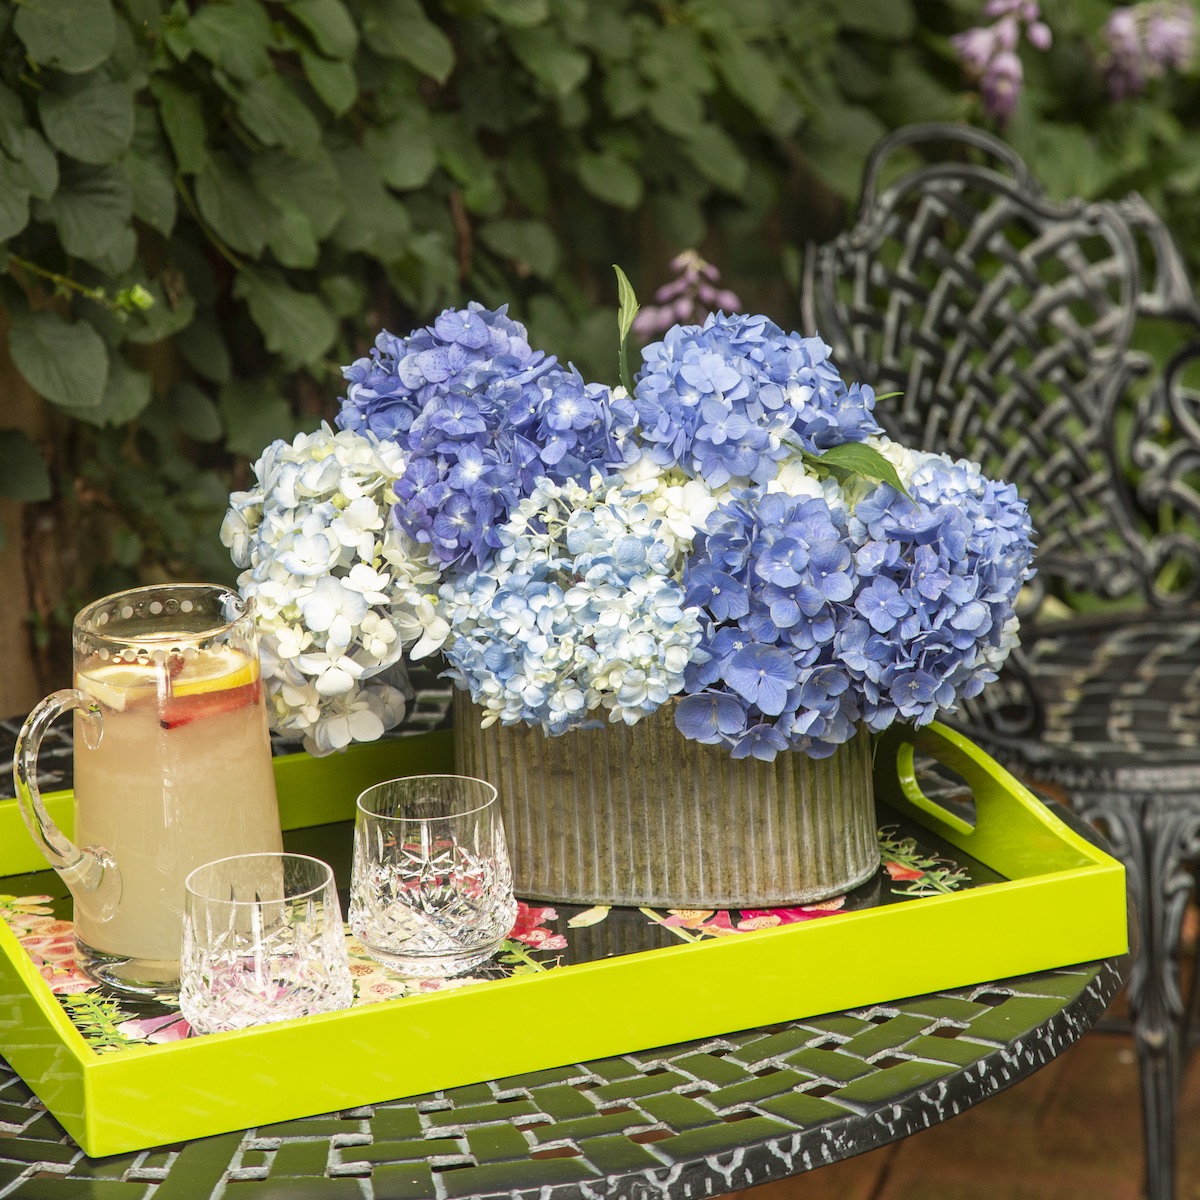 Arrangement of blue and white hydrangeas in a galvanized container next to a pitcher of white sangria on a chartreuse tray.